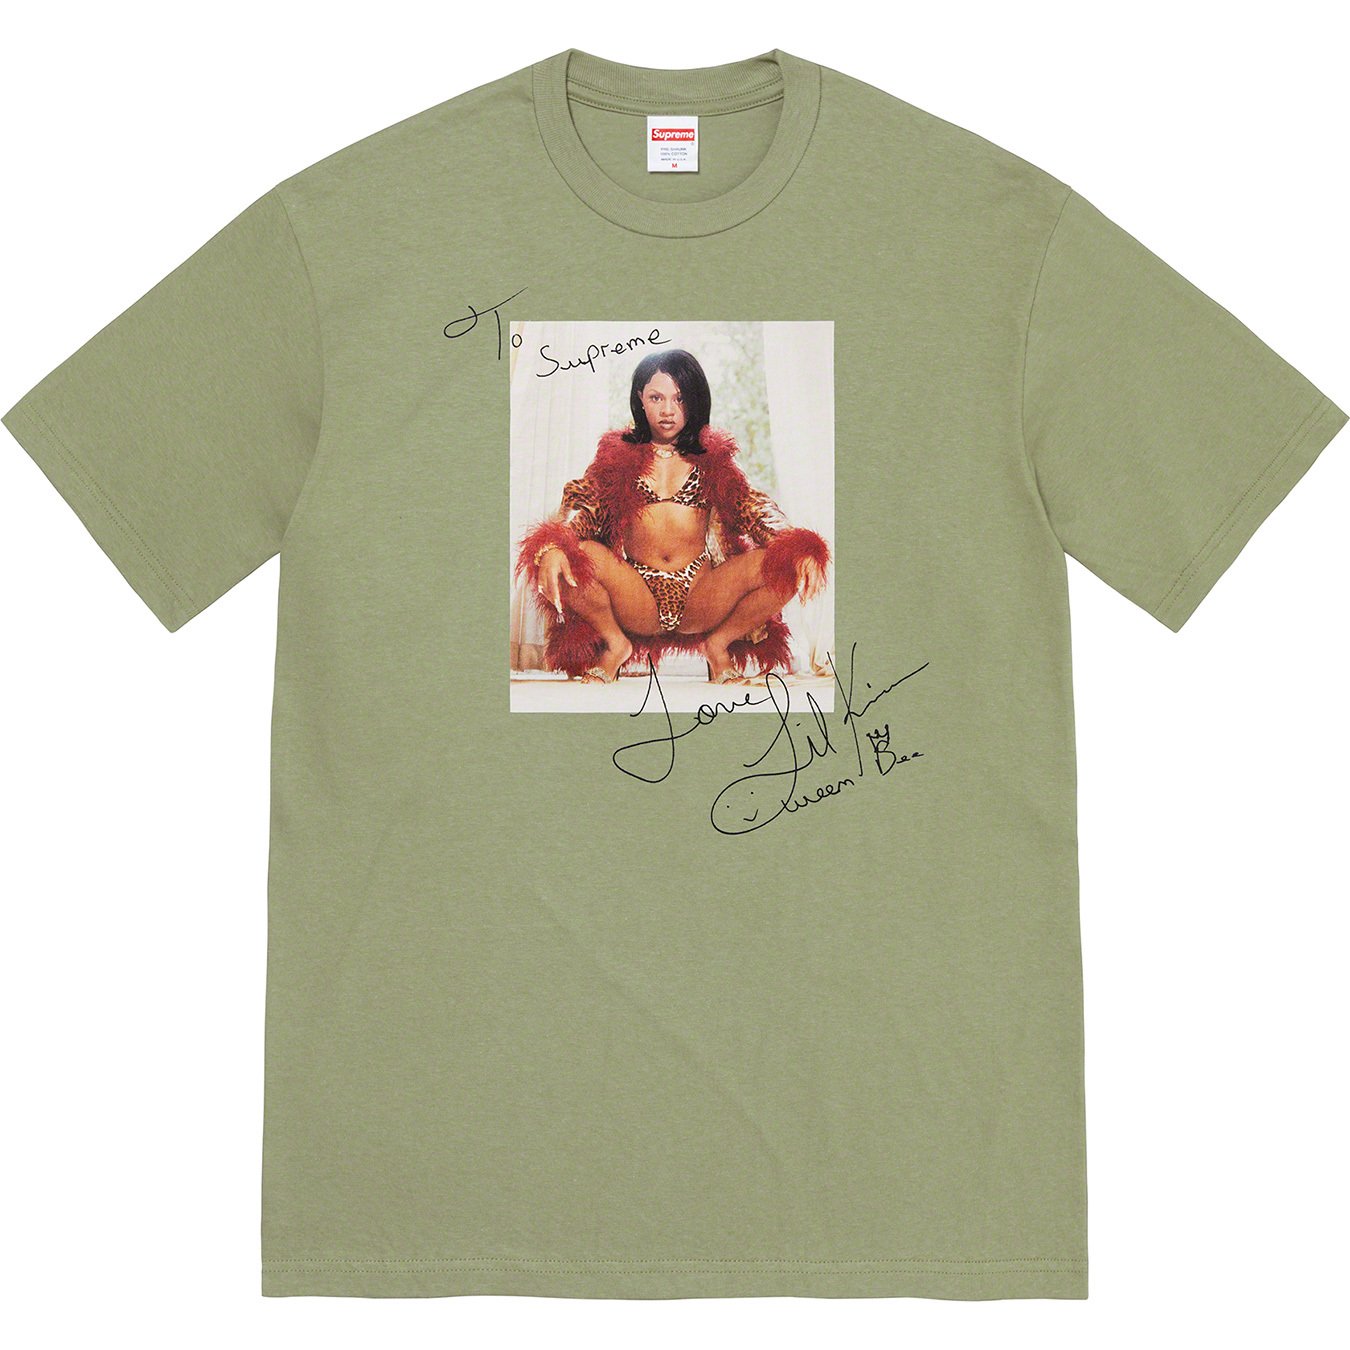 Supreme's spring T-shirt drop features a bloody Box Logo and Lil Kim